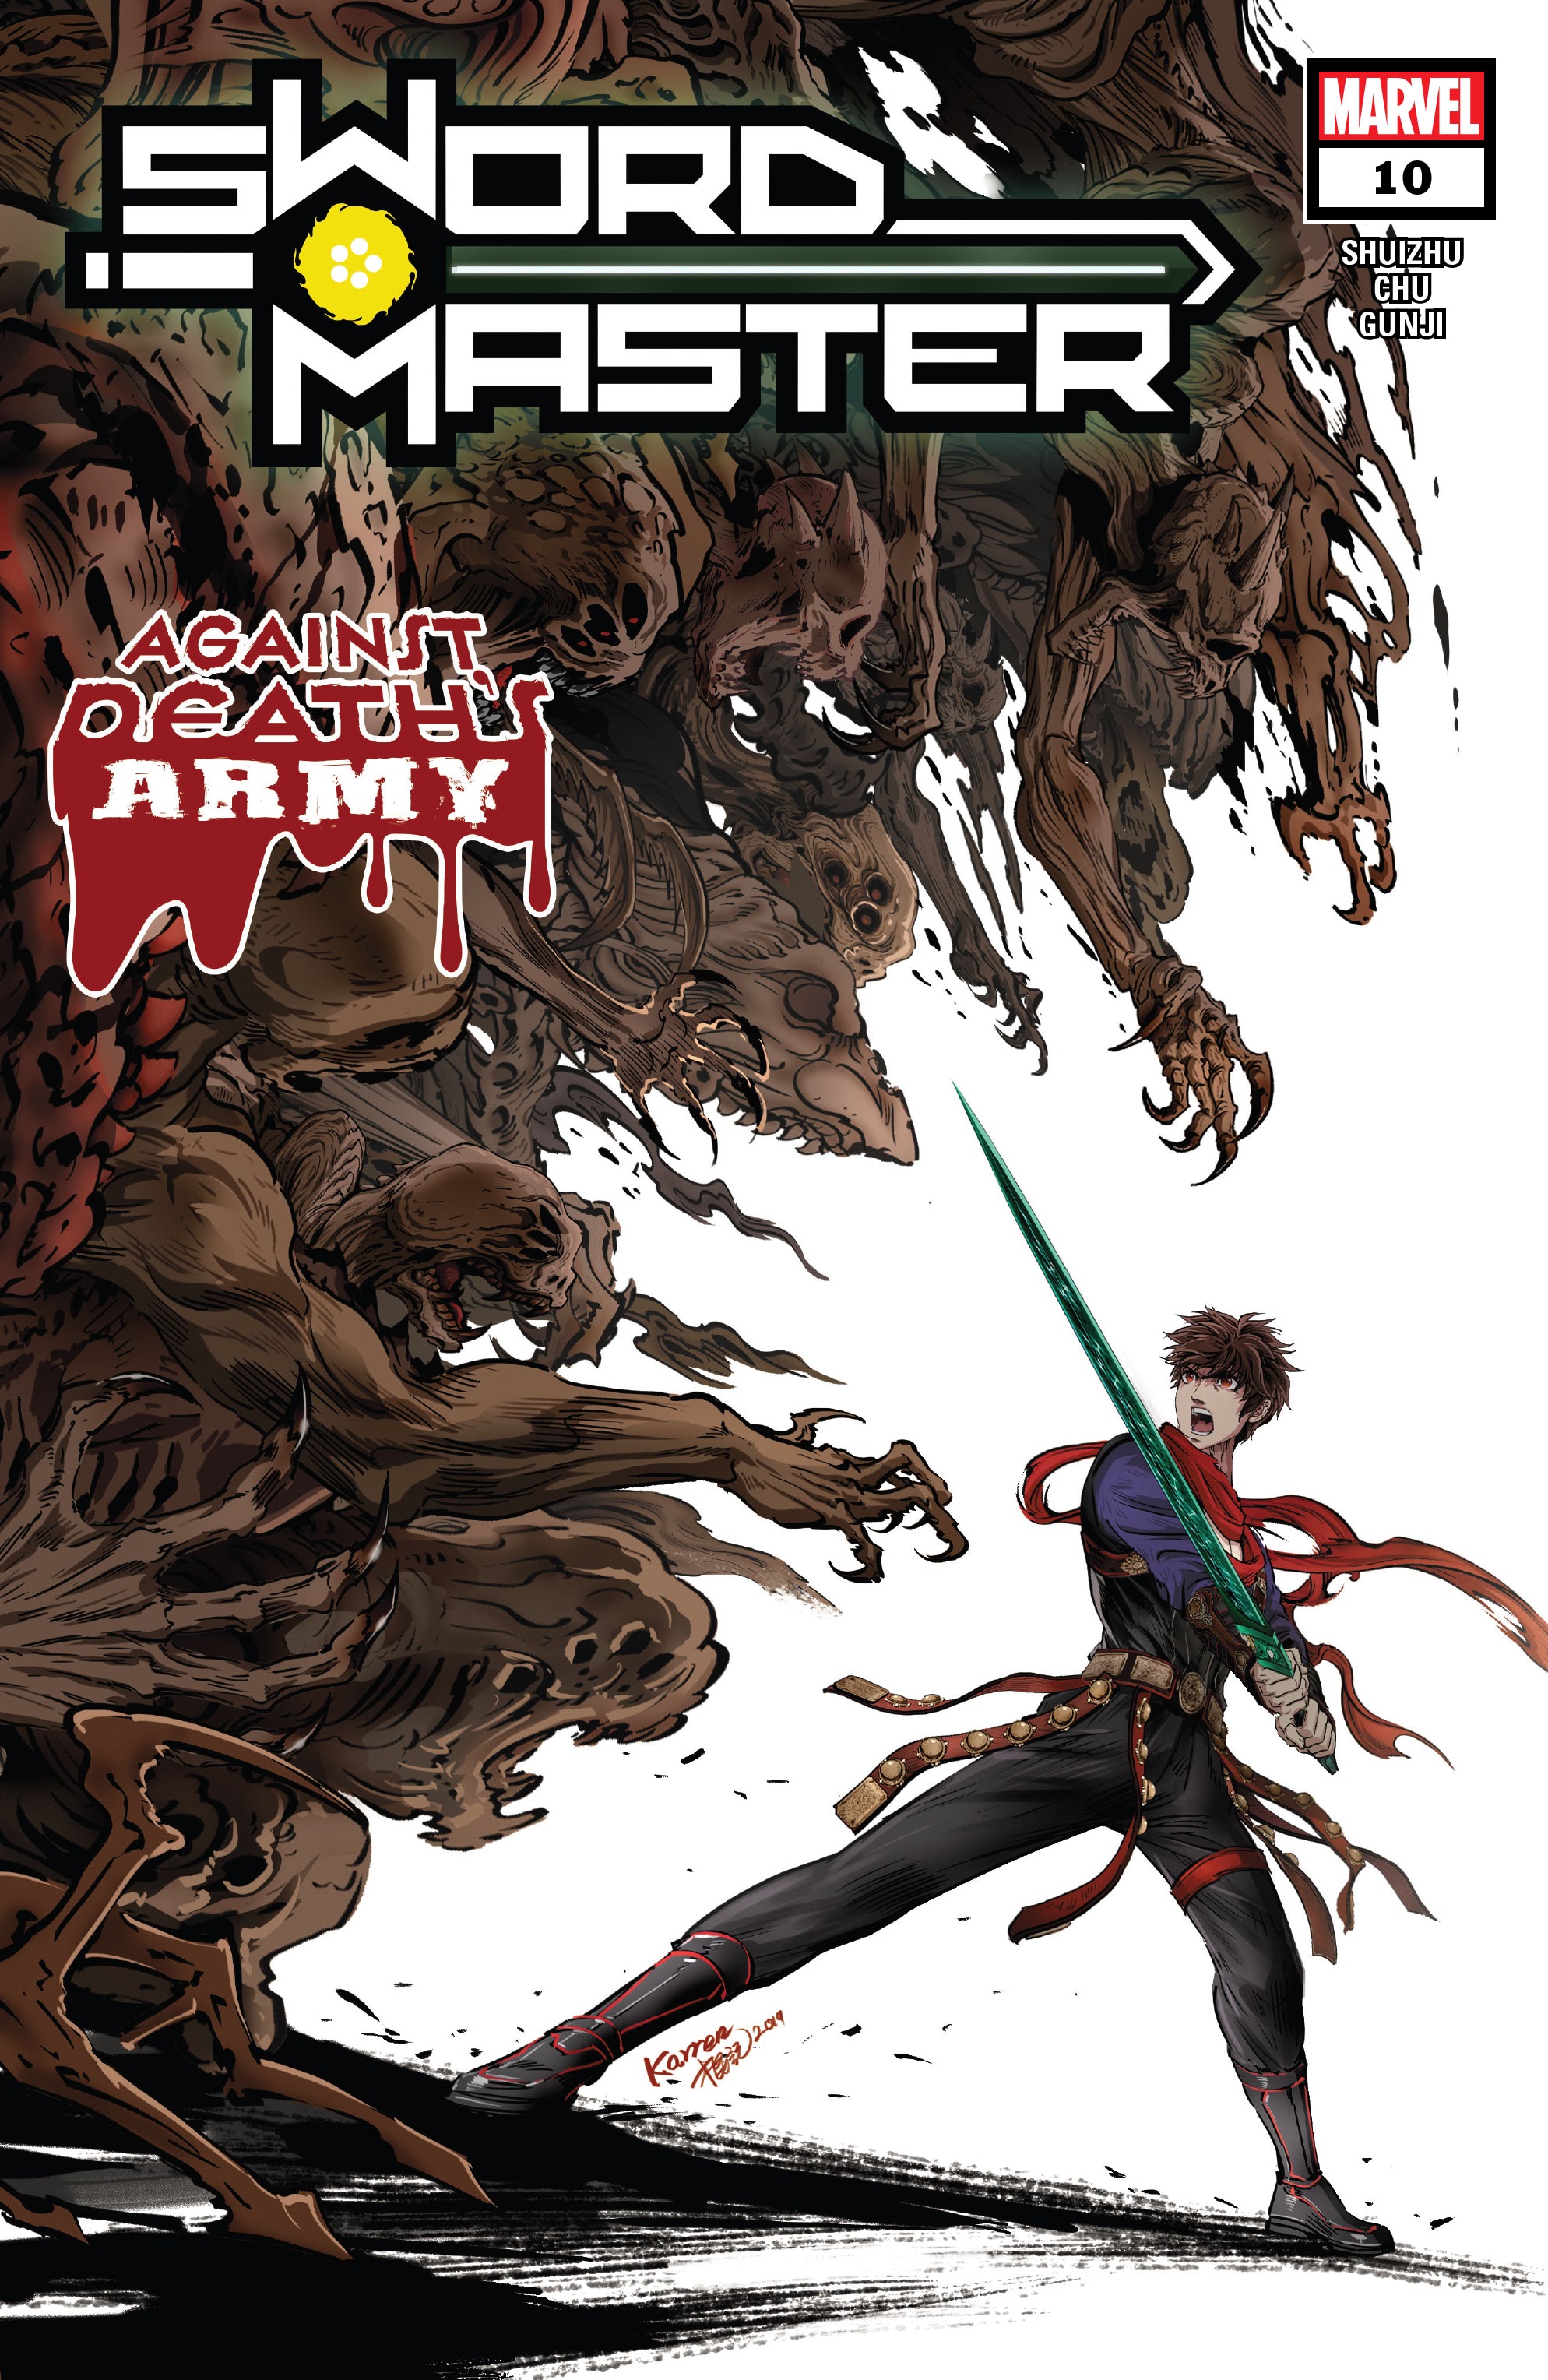 Read online Sword Master comic -  Issue #10 - 1